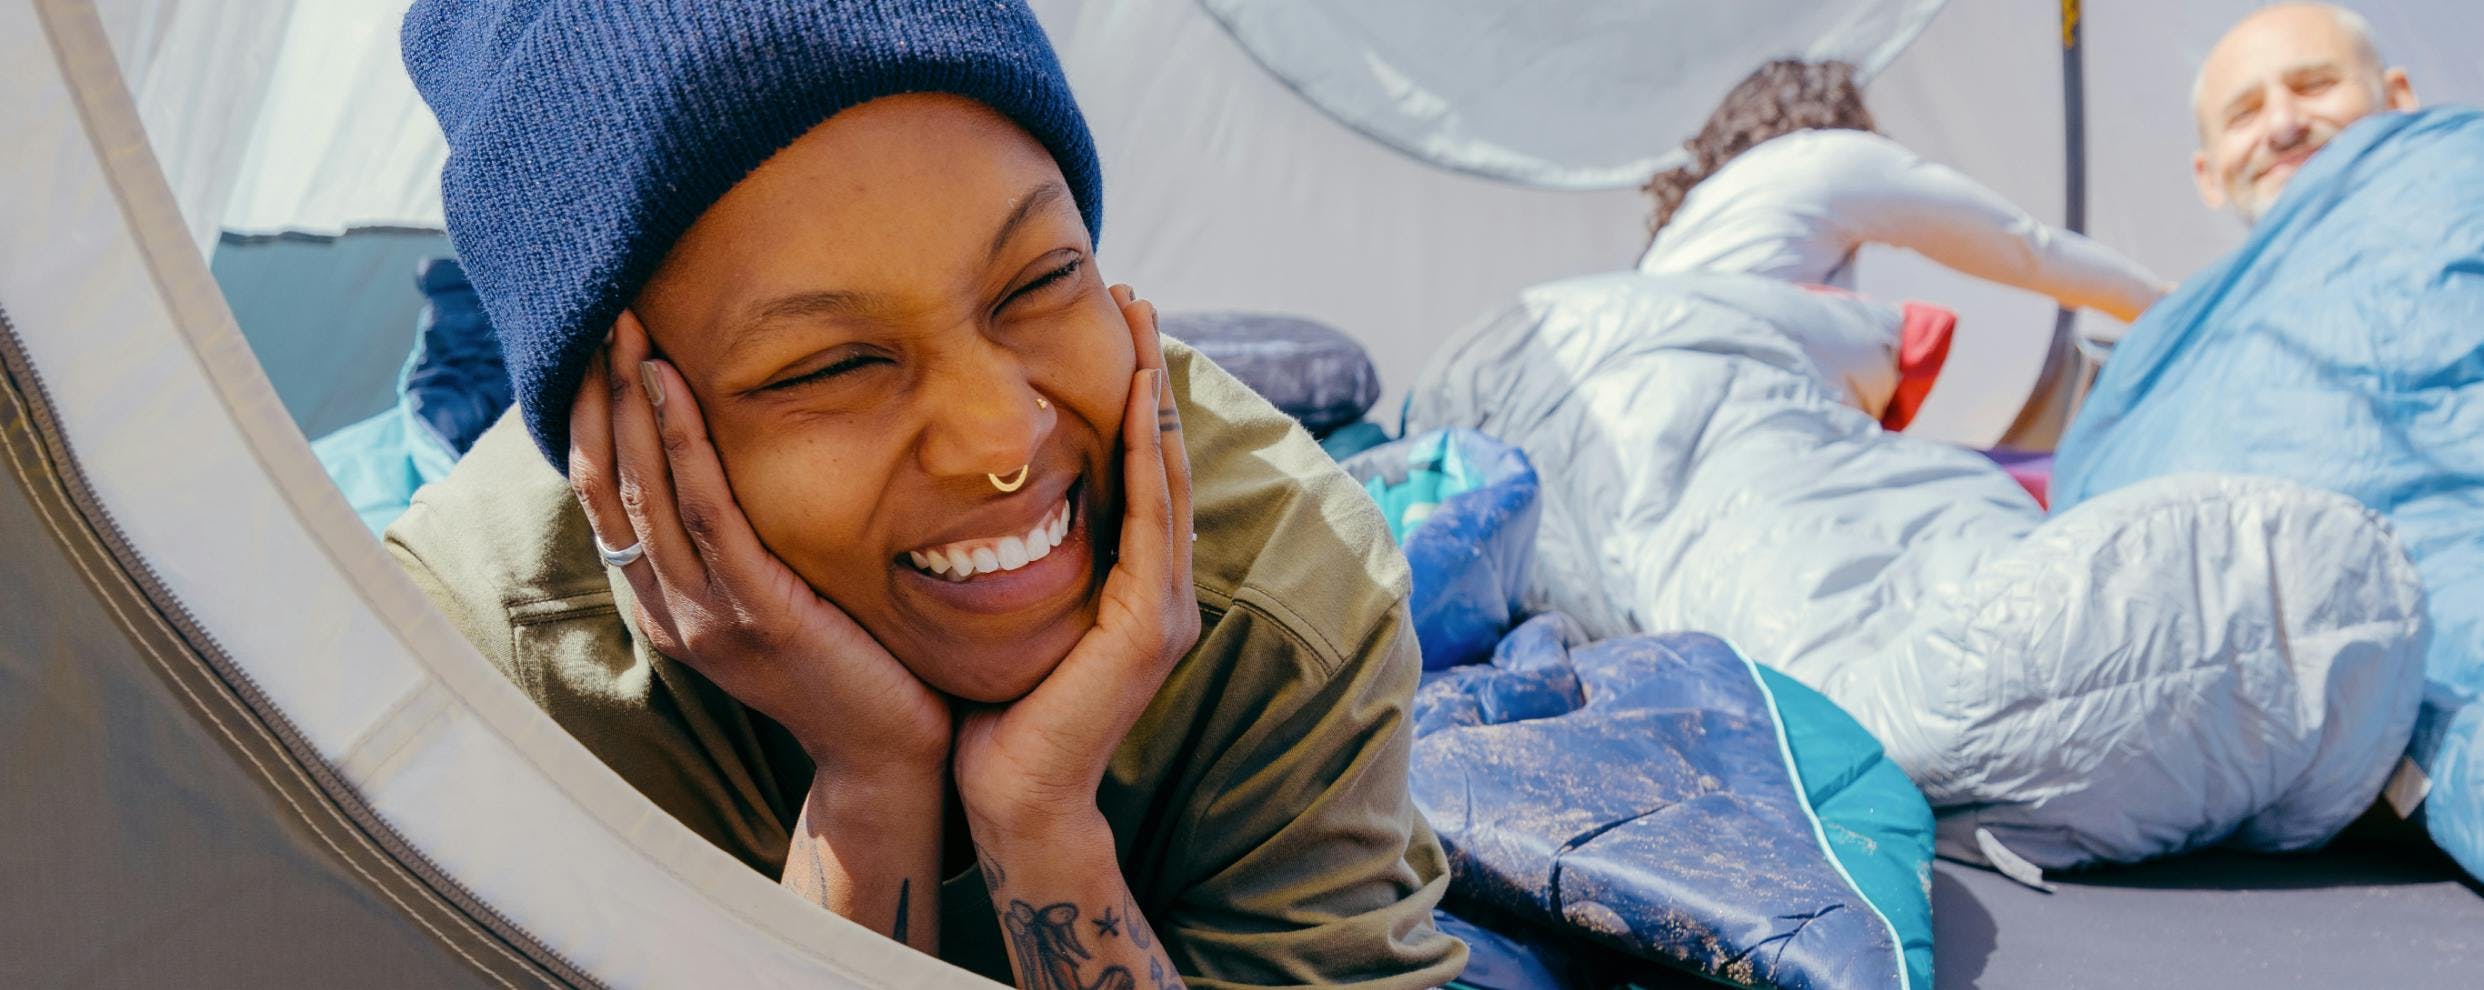 The latest, lightest, roomiest and coziest camp gear to make wild spaces feel like home.